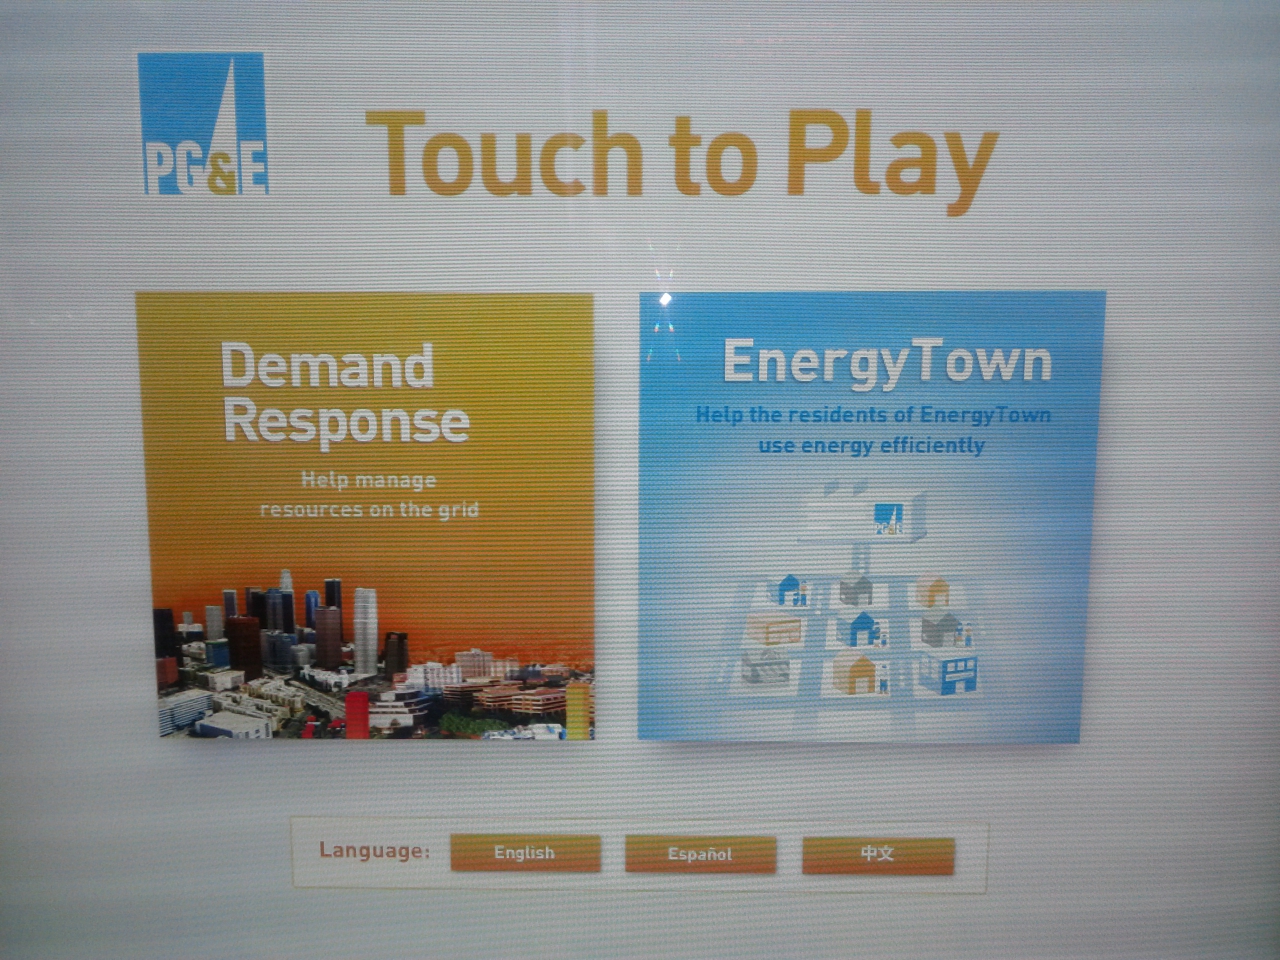 Choose which game you want to play - Demand Response or Energy Town